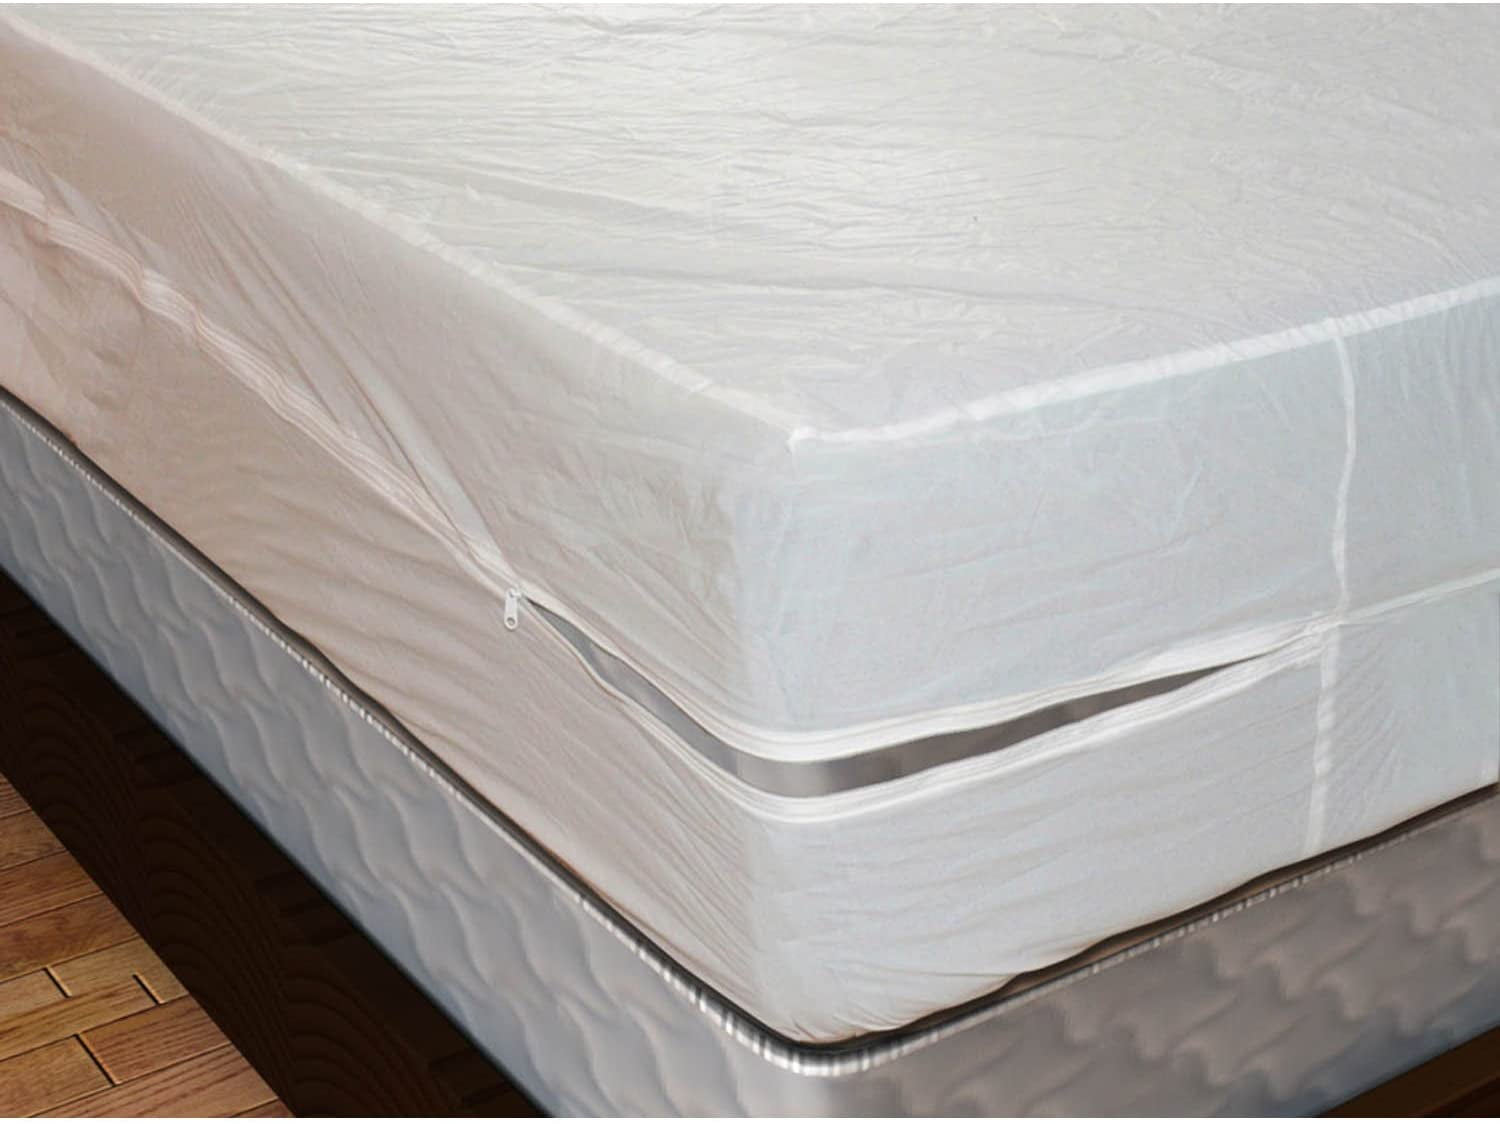 plastic mattress cover for queen bed